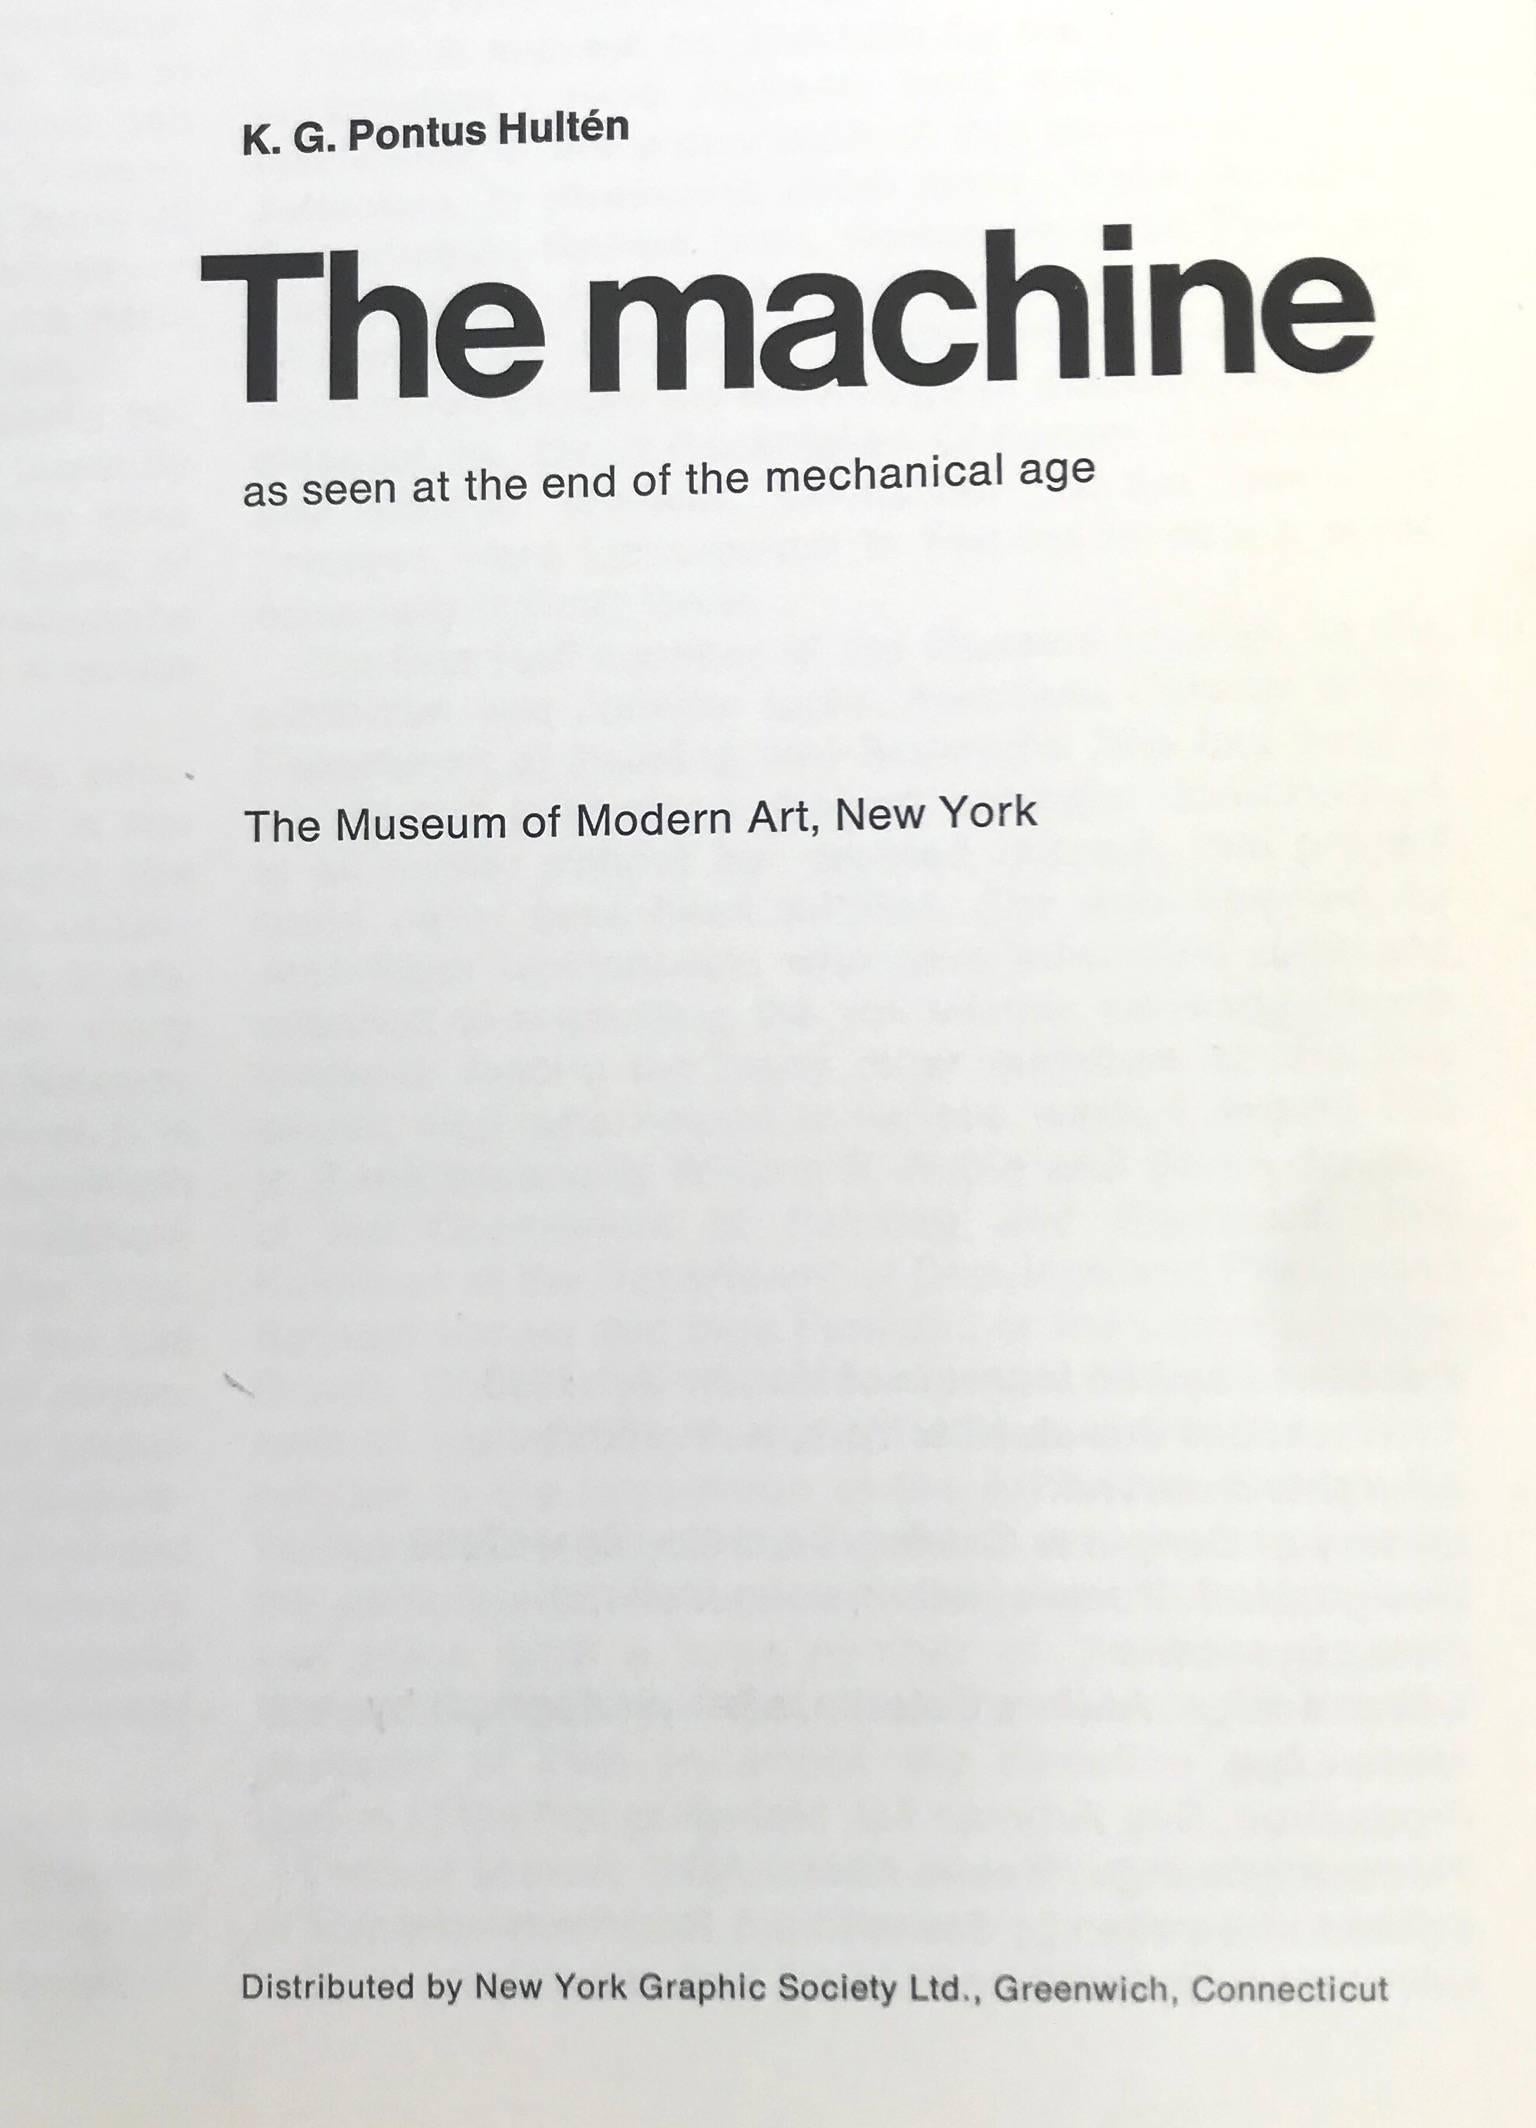 American Rare MOMA “The Machine” Book with Aluminum Covers, 1968 For Sale